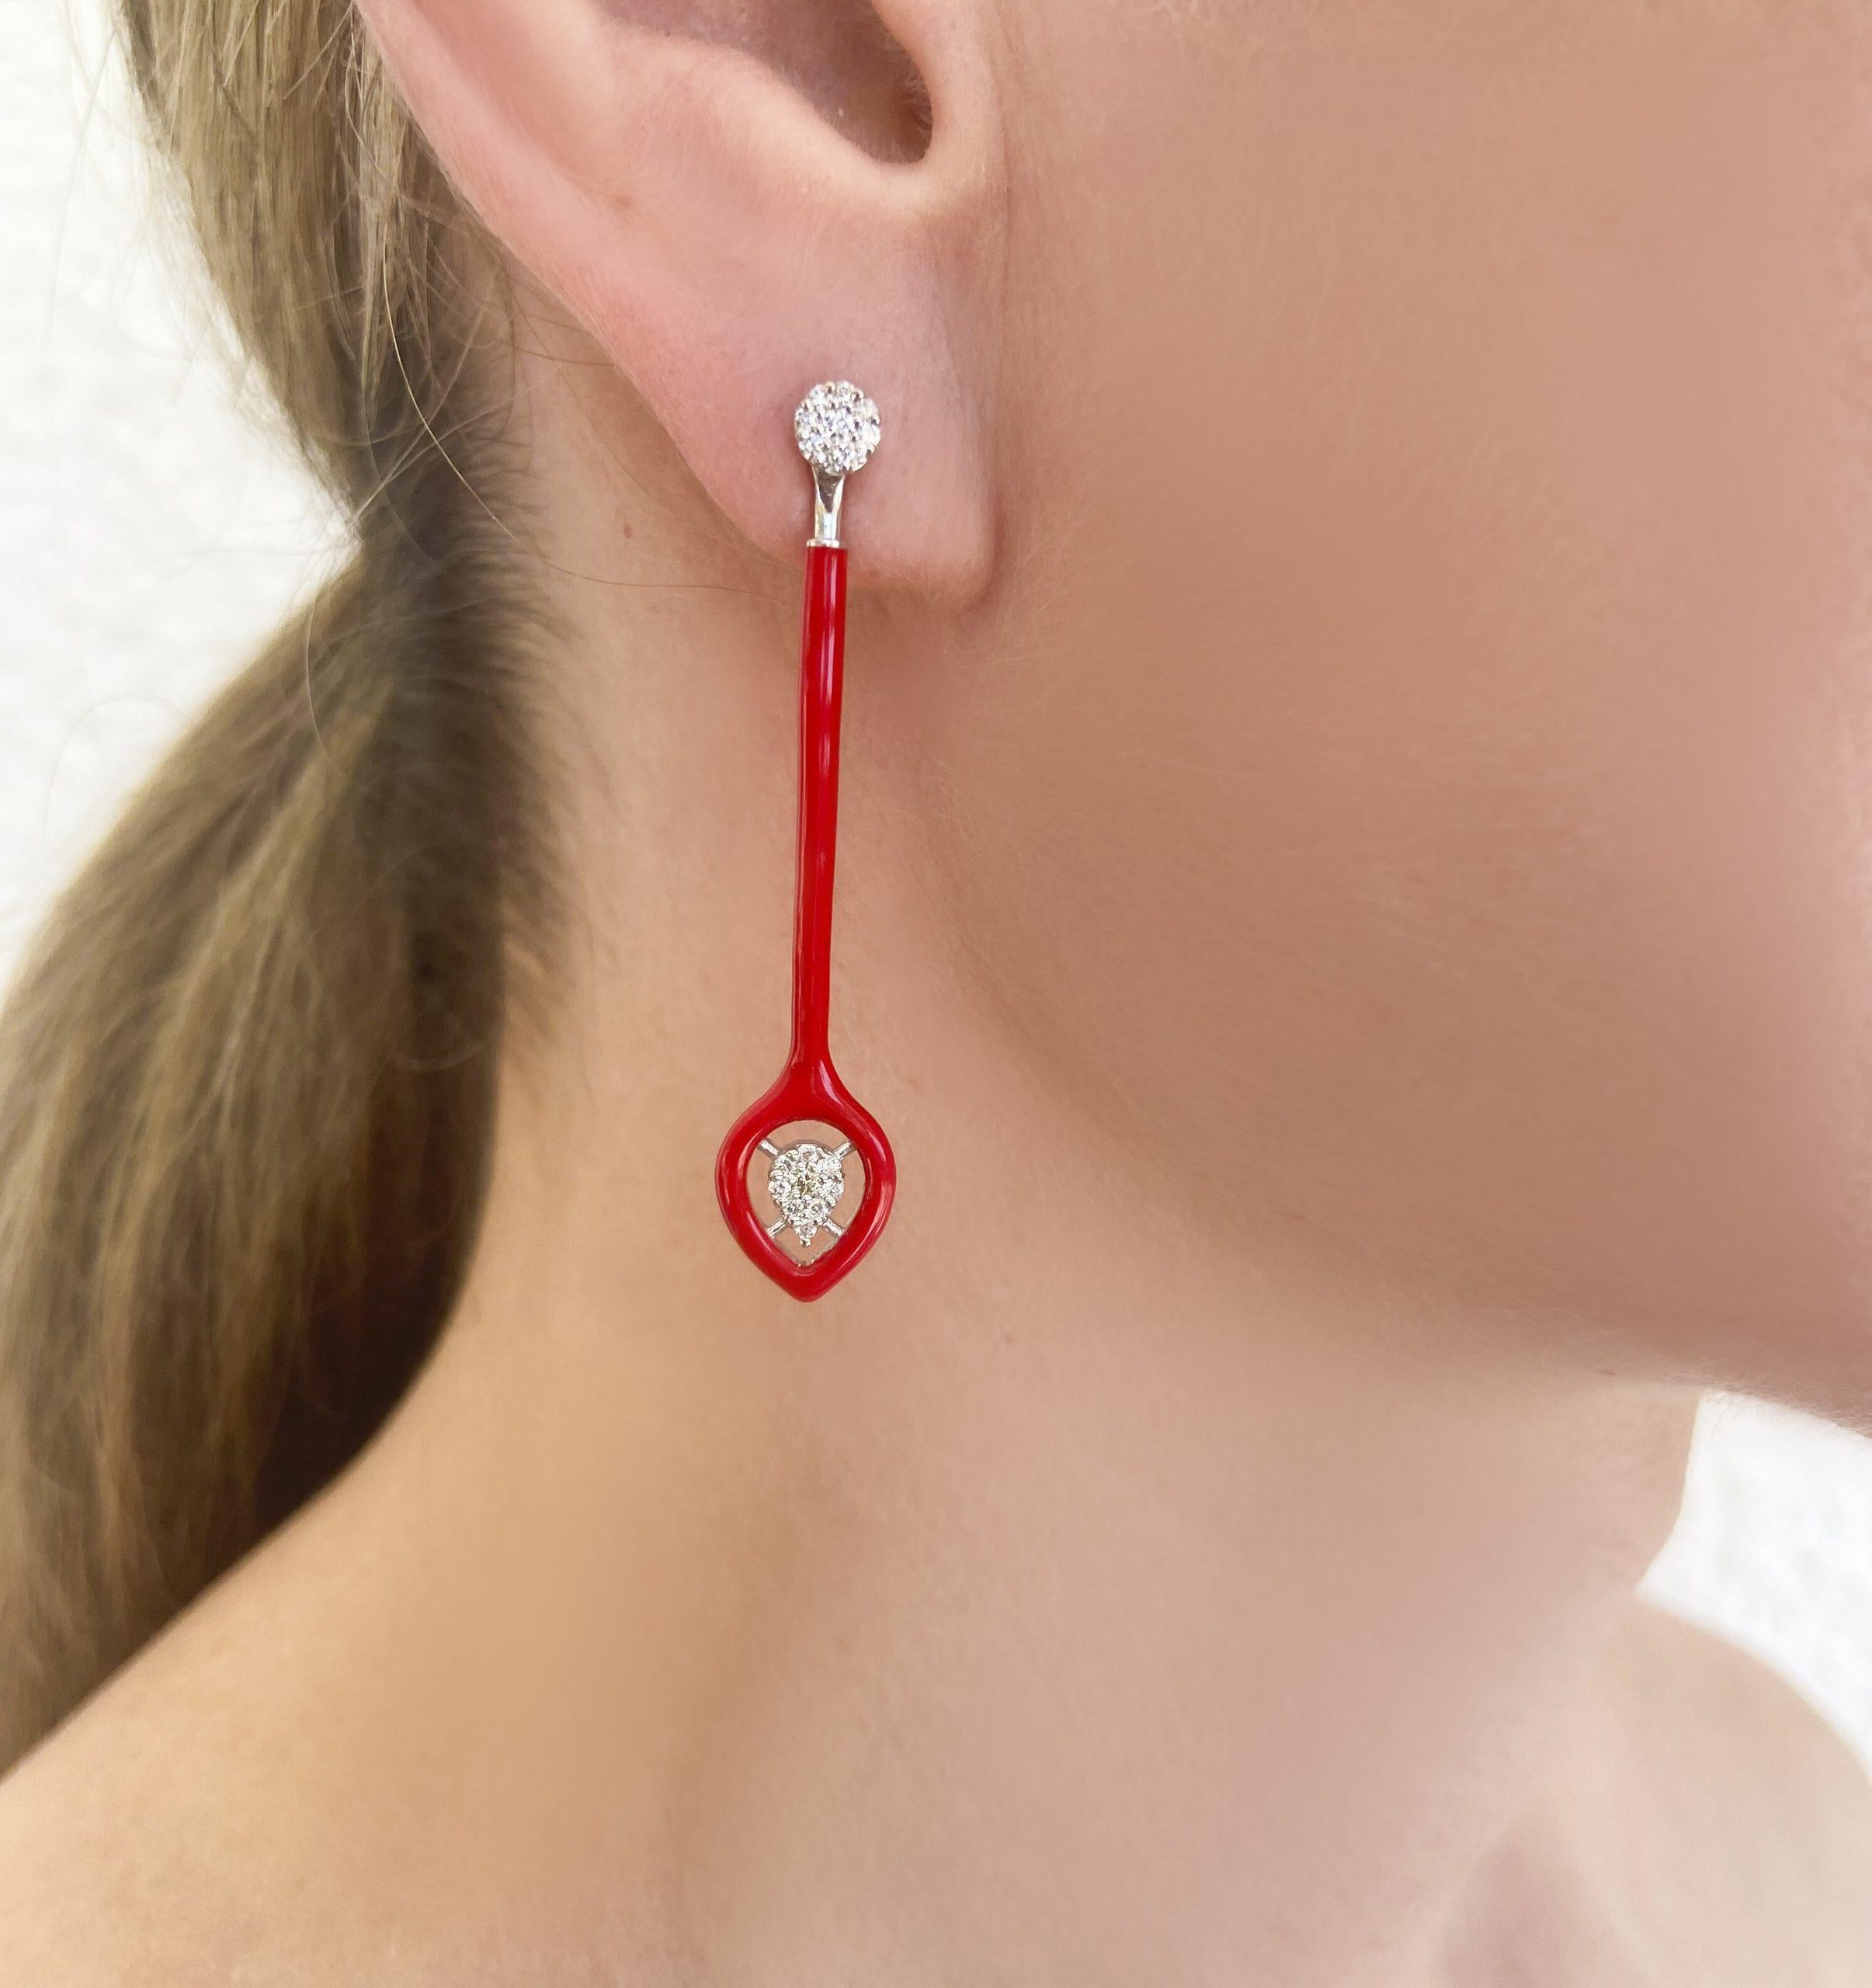 100% Recycled 14 K White Gold

Diamonds

Enamel

Two in one: The long part of the earring is Removable- Detachable, allowing a beautiful pair gold diamond studs to be used on casual, sport outfits.

Size: 5cm/1,96 inches

Size of round stud: